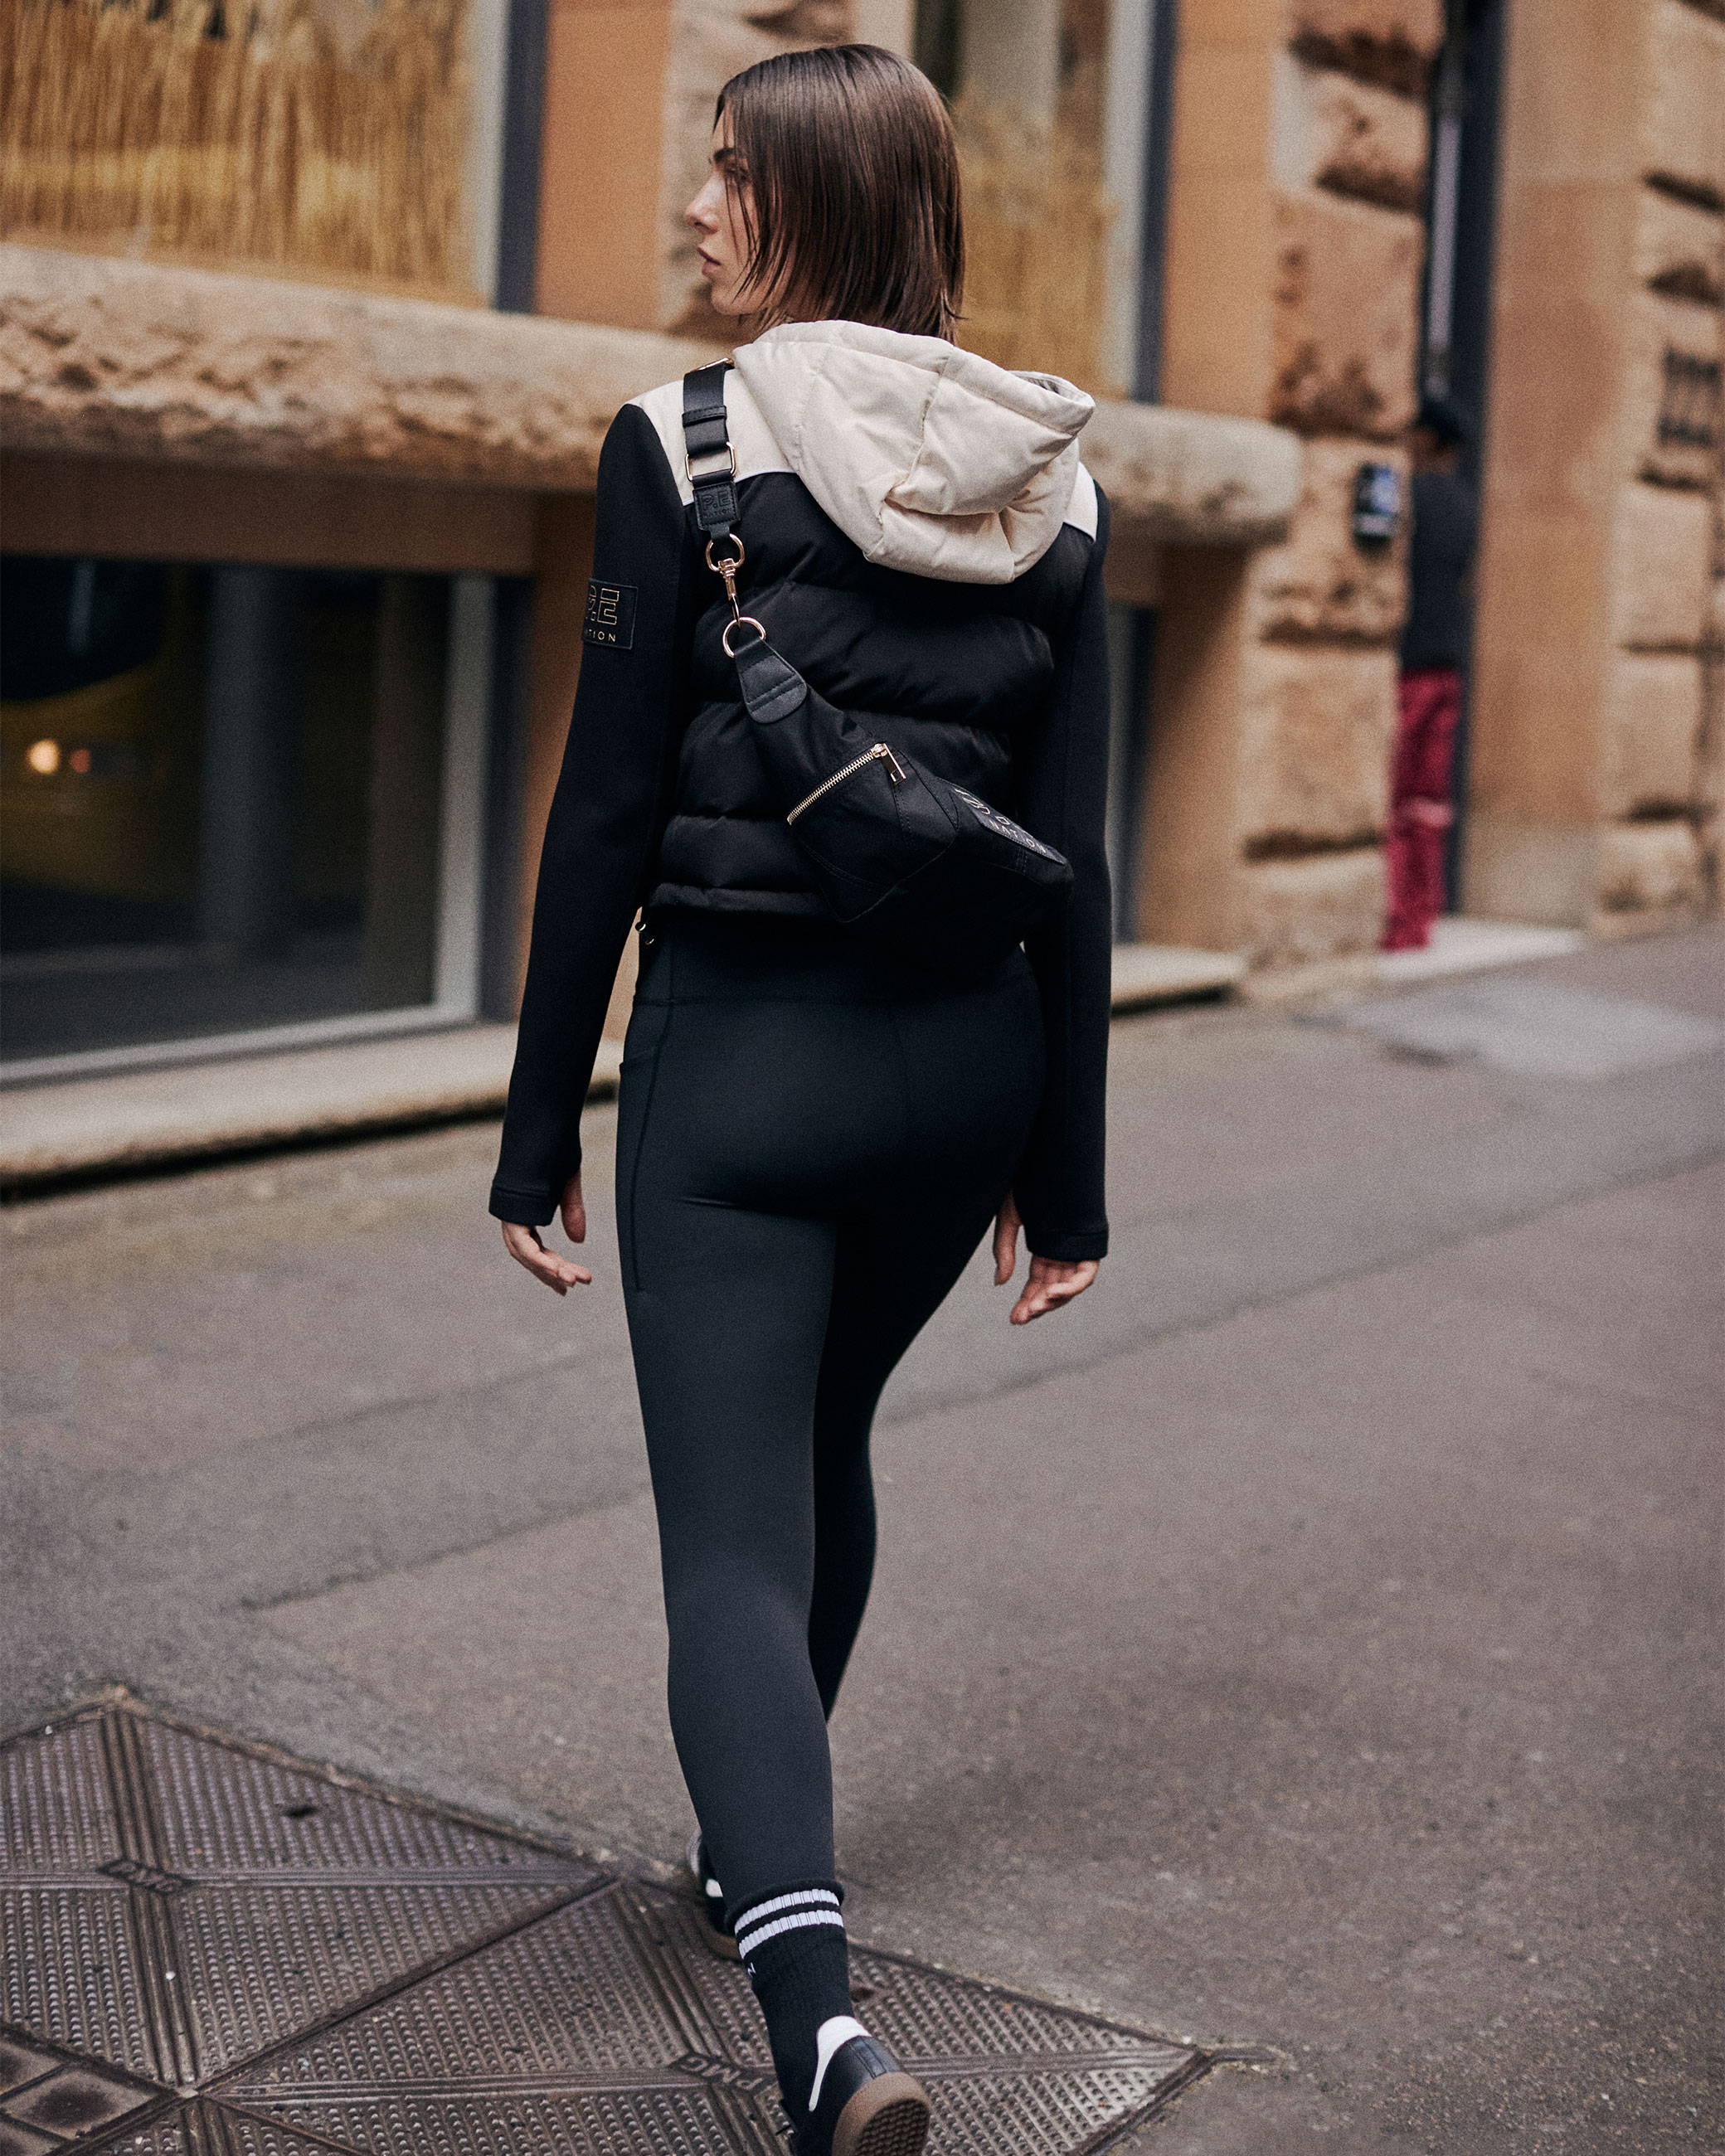 A girl is walking in the city with her back to the camera. She is wearing leggings, a jacket and a cross body bag.